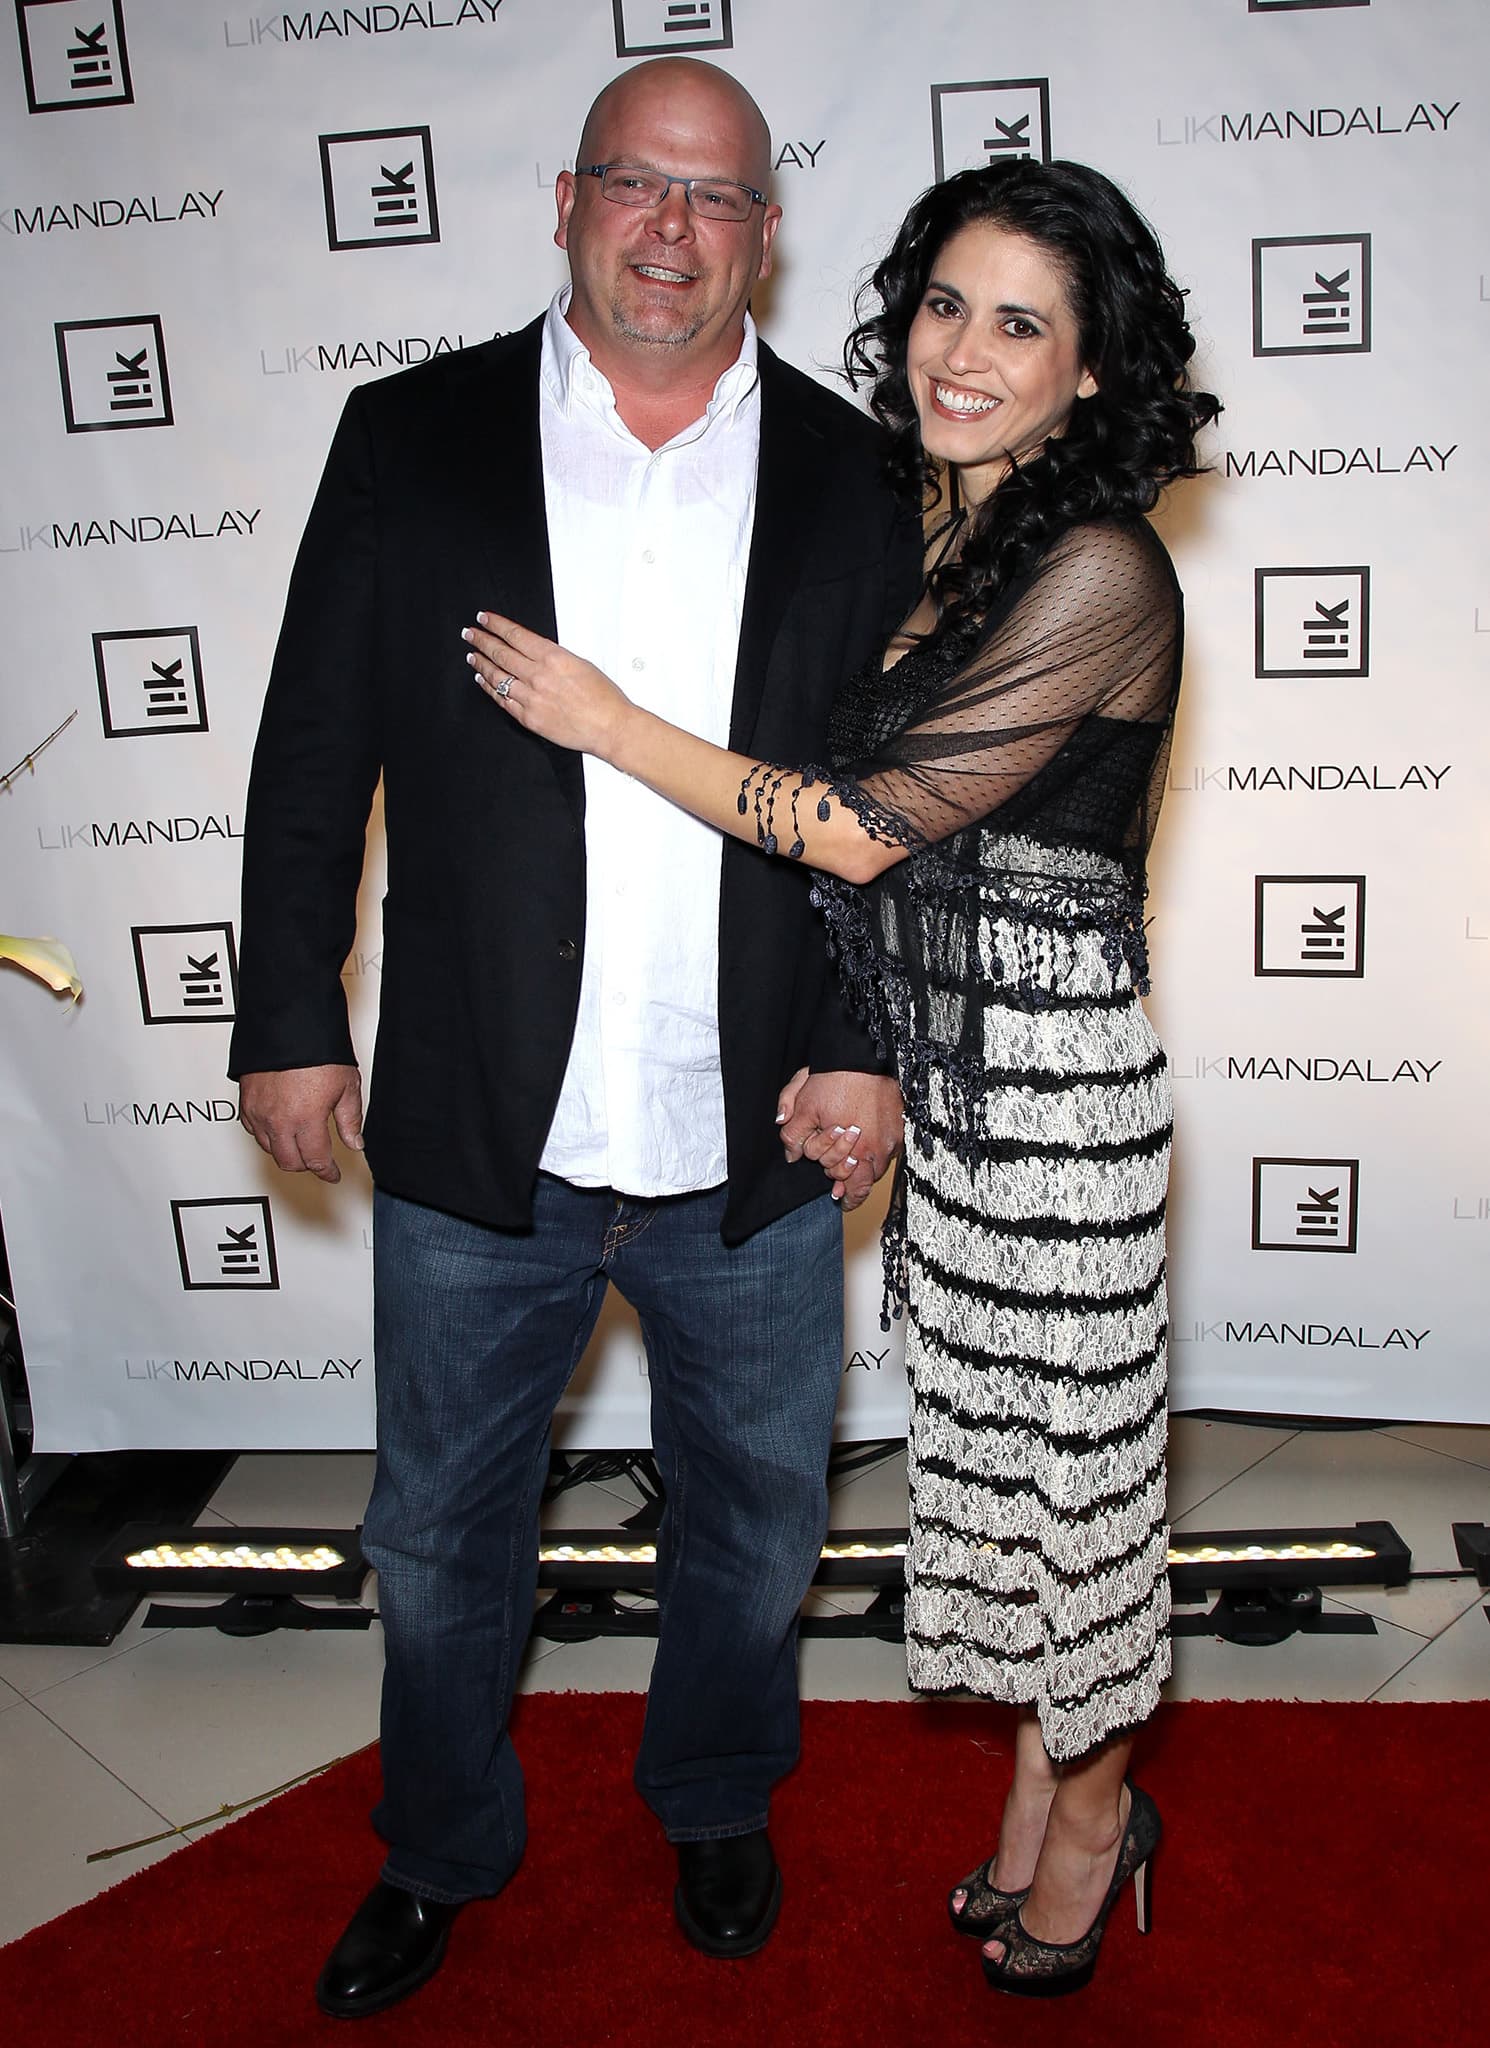 Rick Harrison and Deanna Burditt married in 2013 after he proposed to her on Valentine's Day in 2012